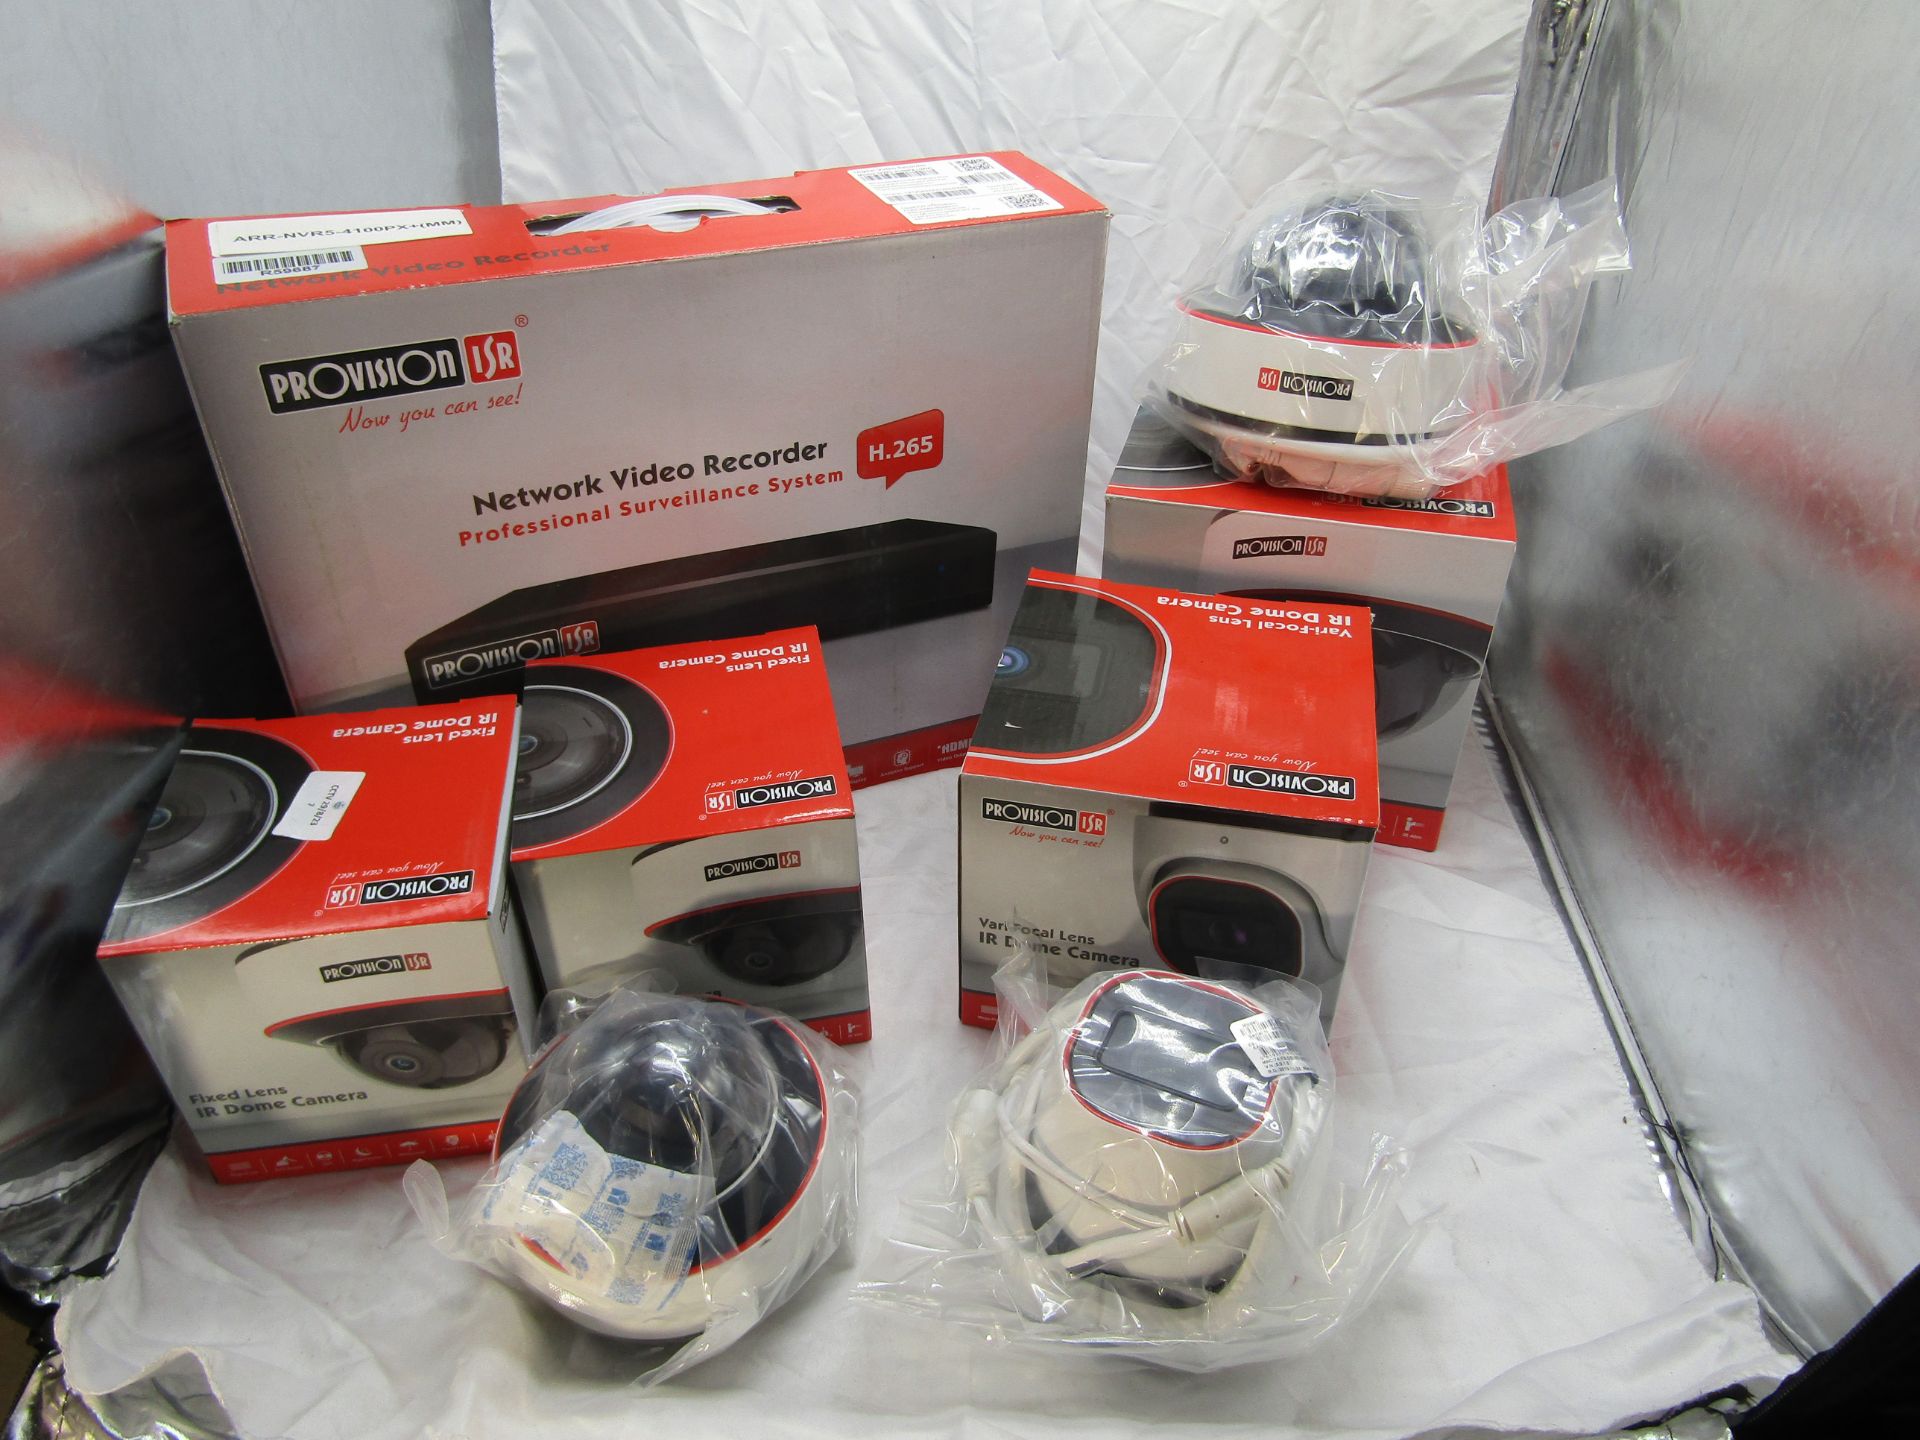 Provision 4 camera CCTV system, includes the followingARR-NVR_4100Px+(MM) Provision NVR5-4100PX-MM